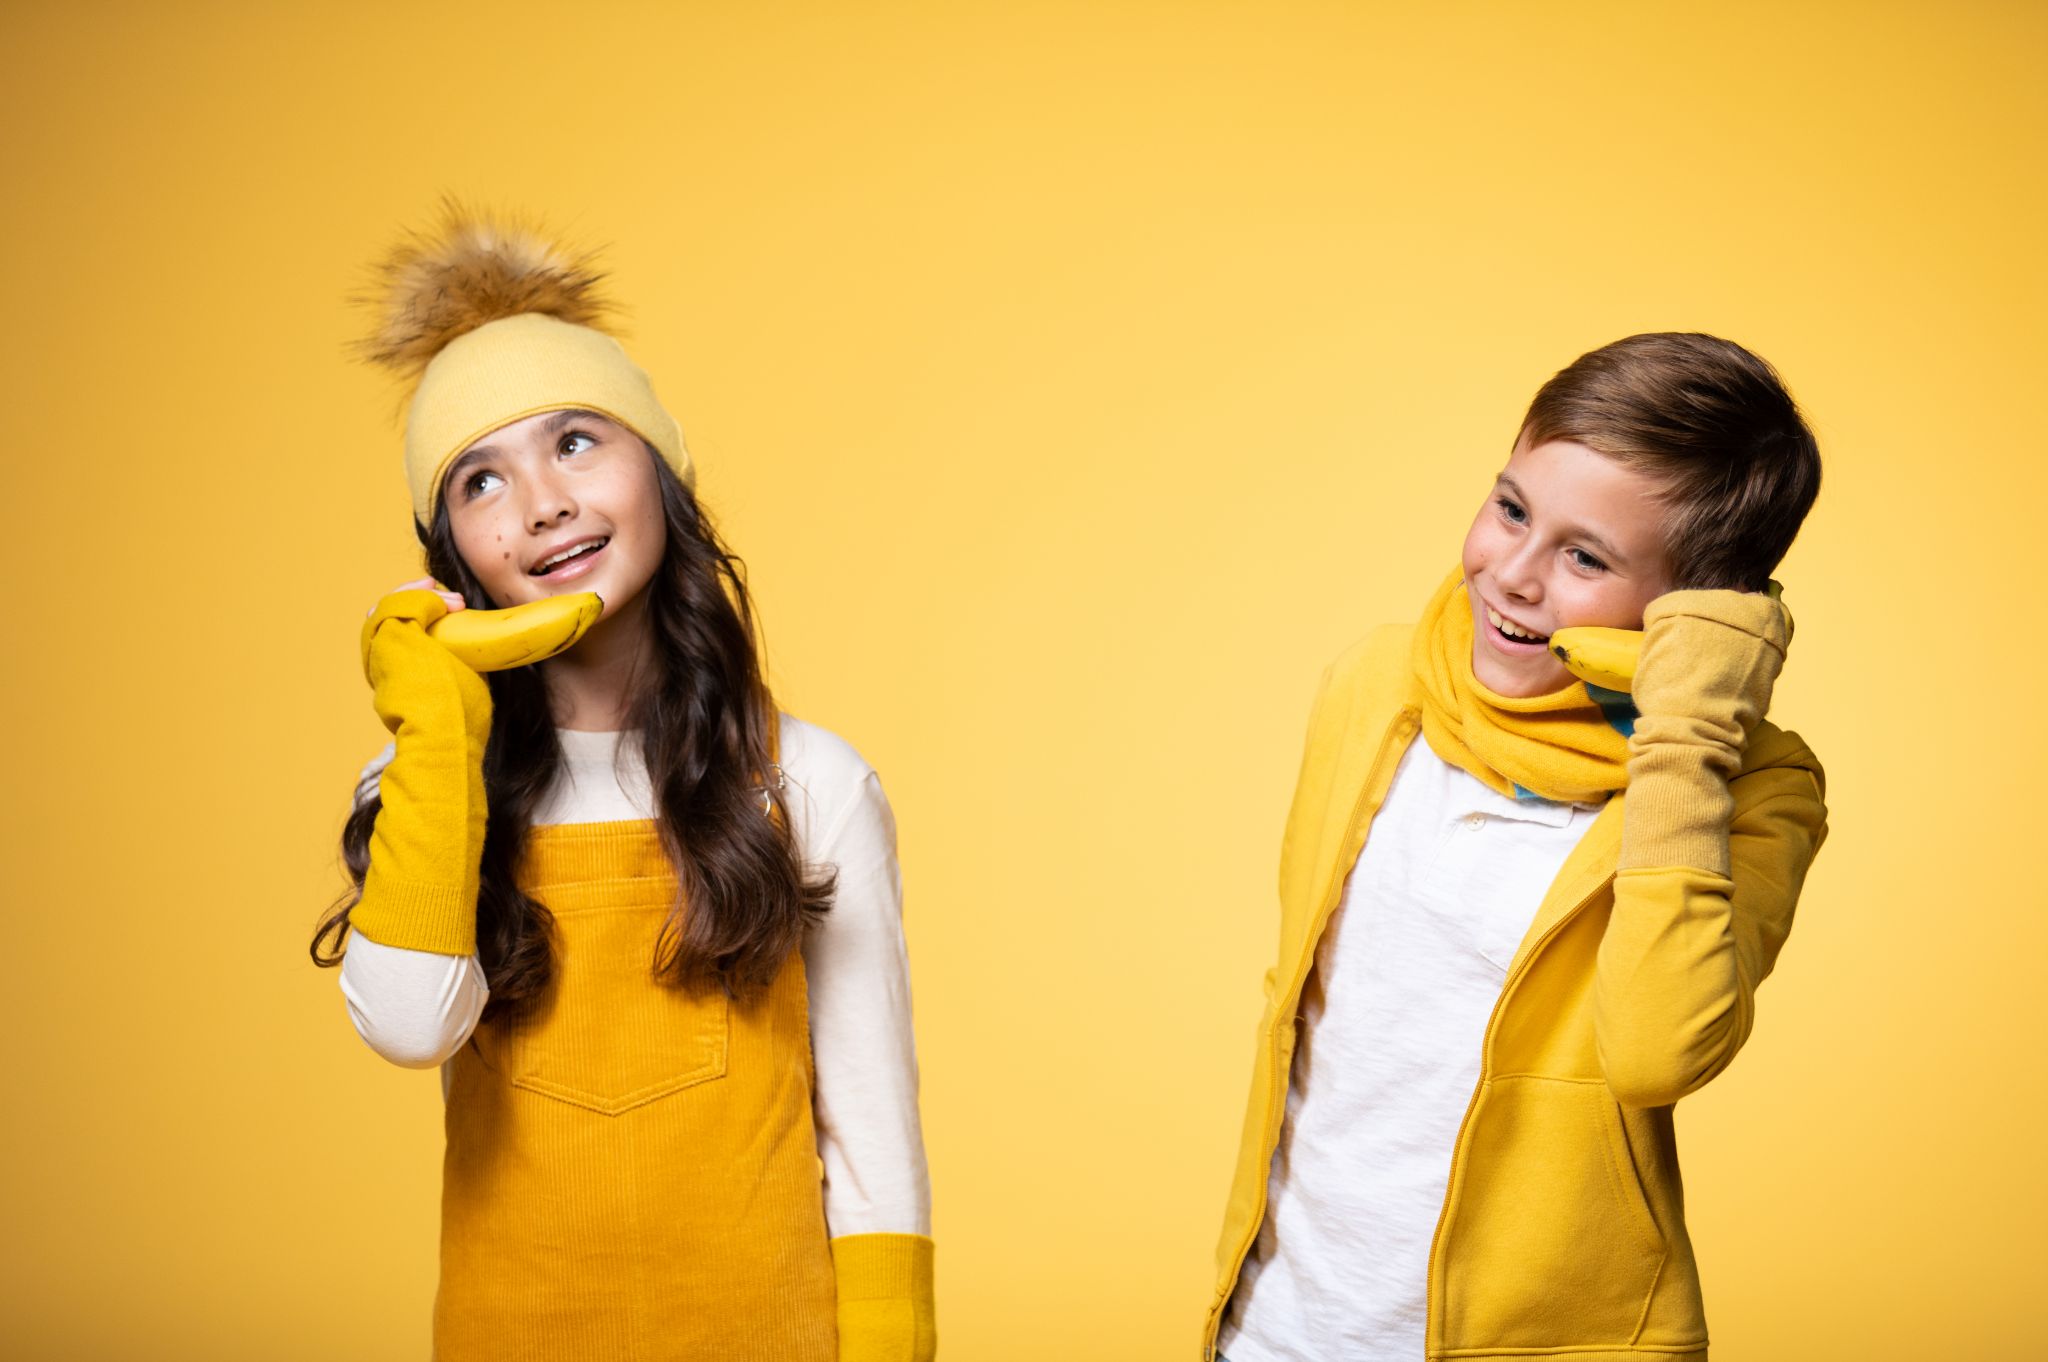 IU C&I Studios Portfolio BB Sheep Lifestyle Colors PROOF Boy model wearing a yellow scarf. jacket and white top and girl model wearing a yellow headband, hand sleeves and overalls as well as white top posing for the camera both using bananas as phones against a yellow backdrop